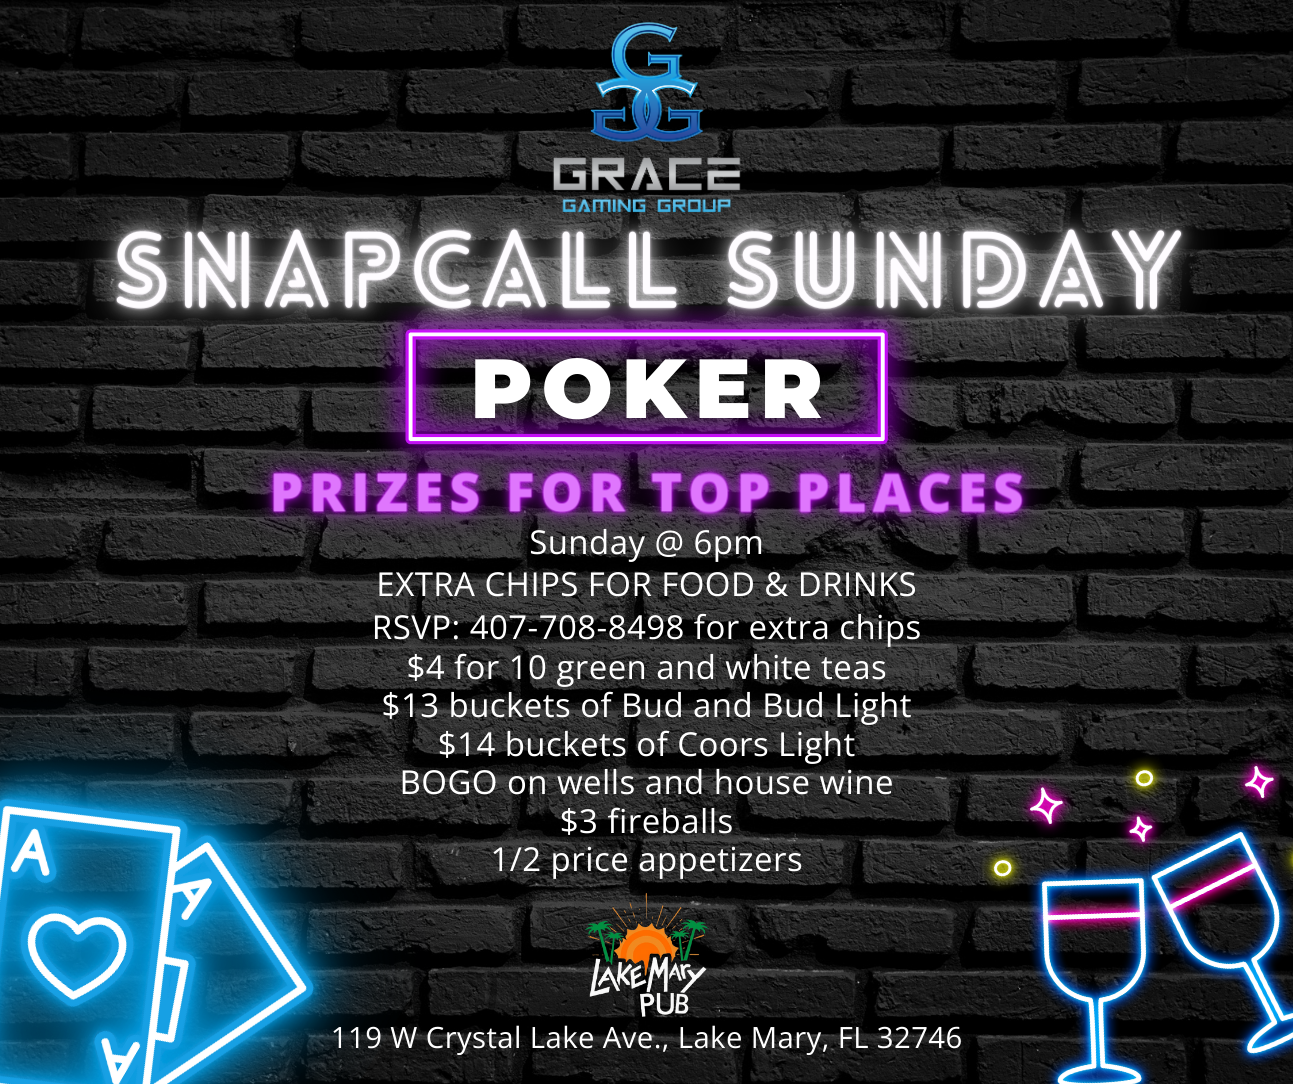 A neon sign that says snapcall sunday poker prizes for top places